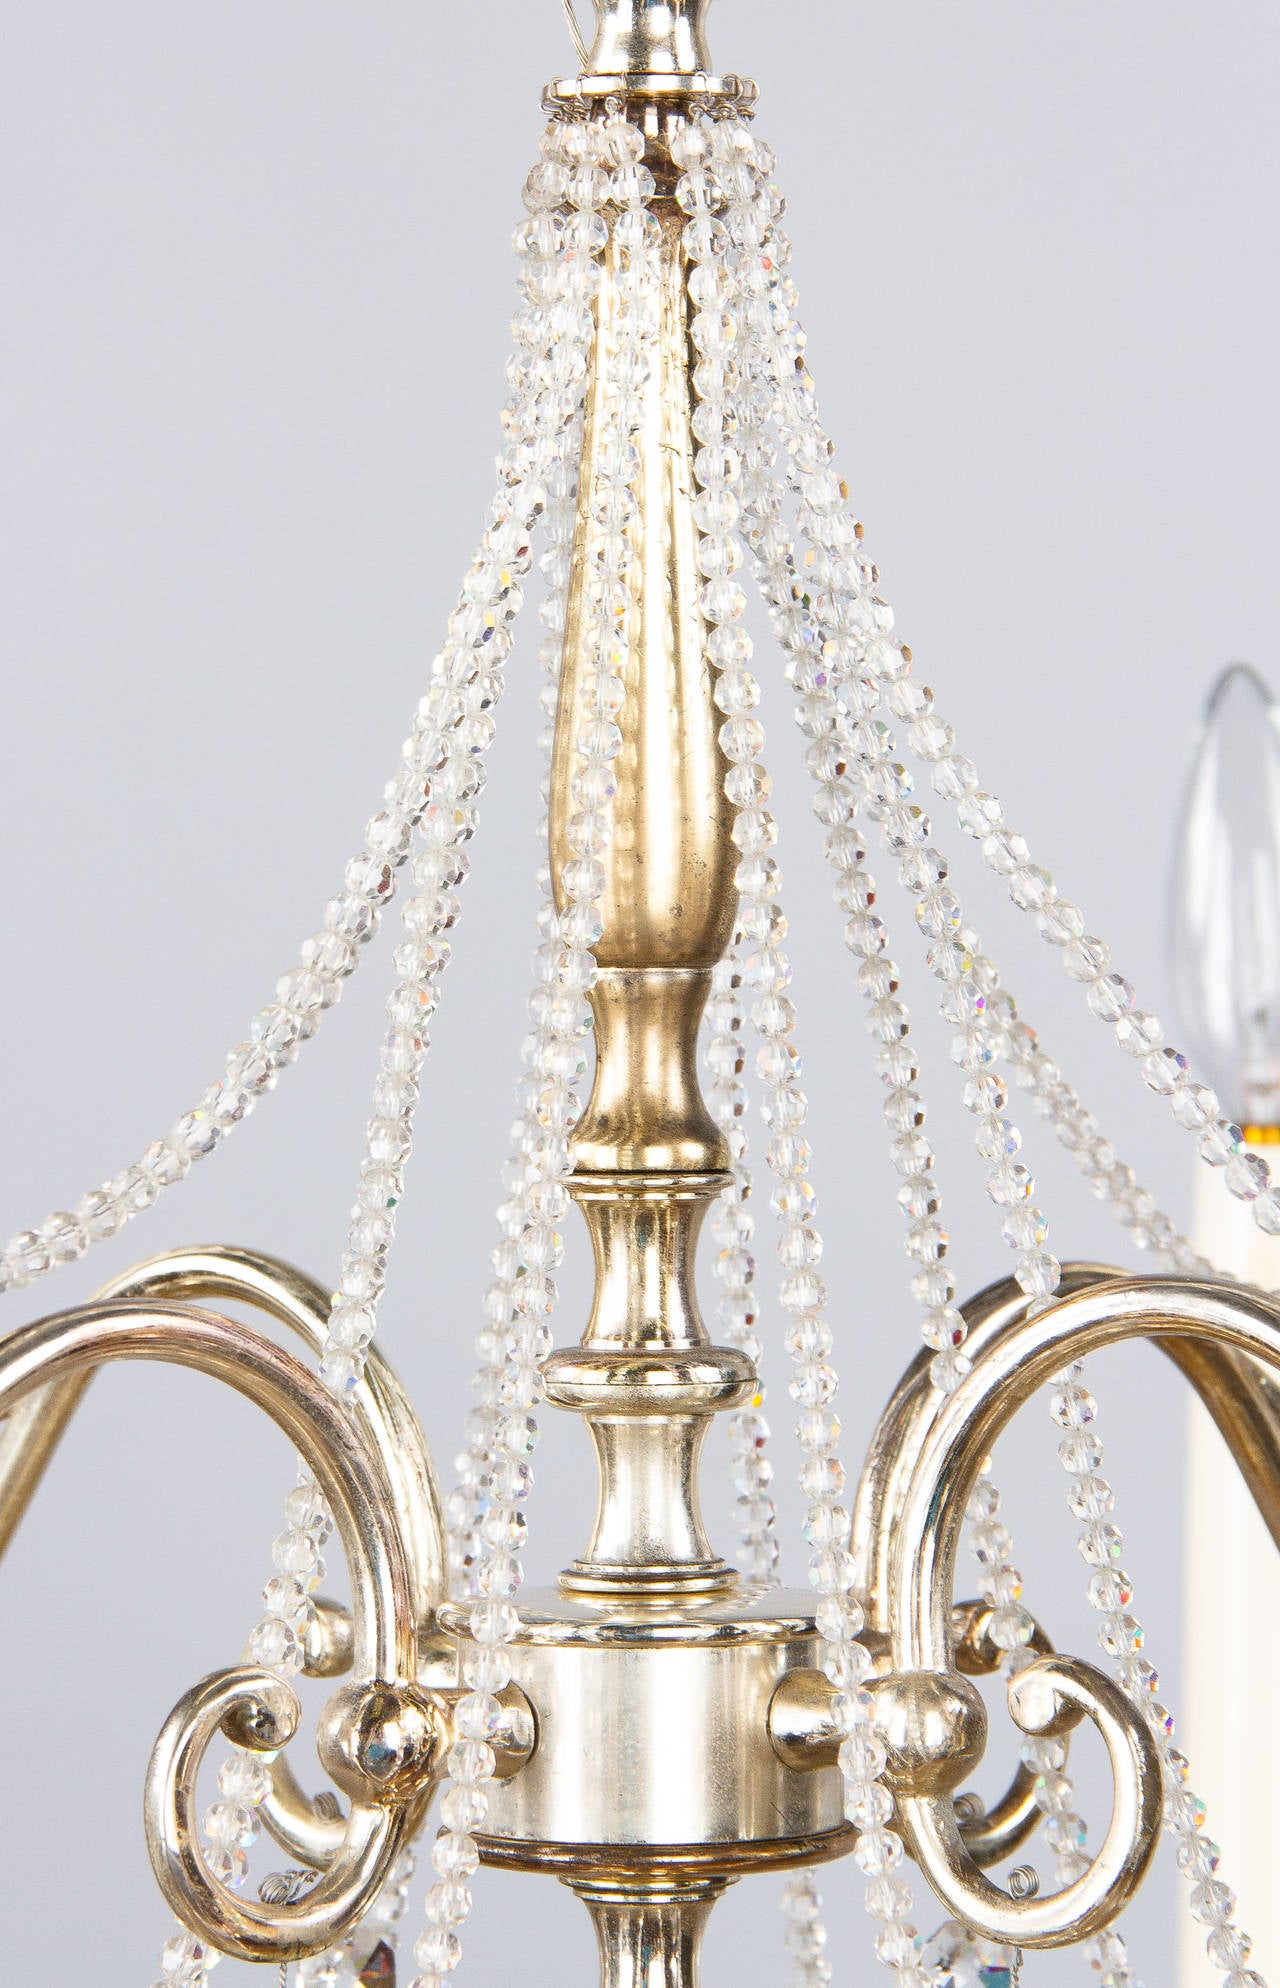 Mid-20th Century French Midcentury Silver Plated Chandelier with Crystals, 1950s